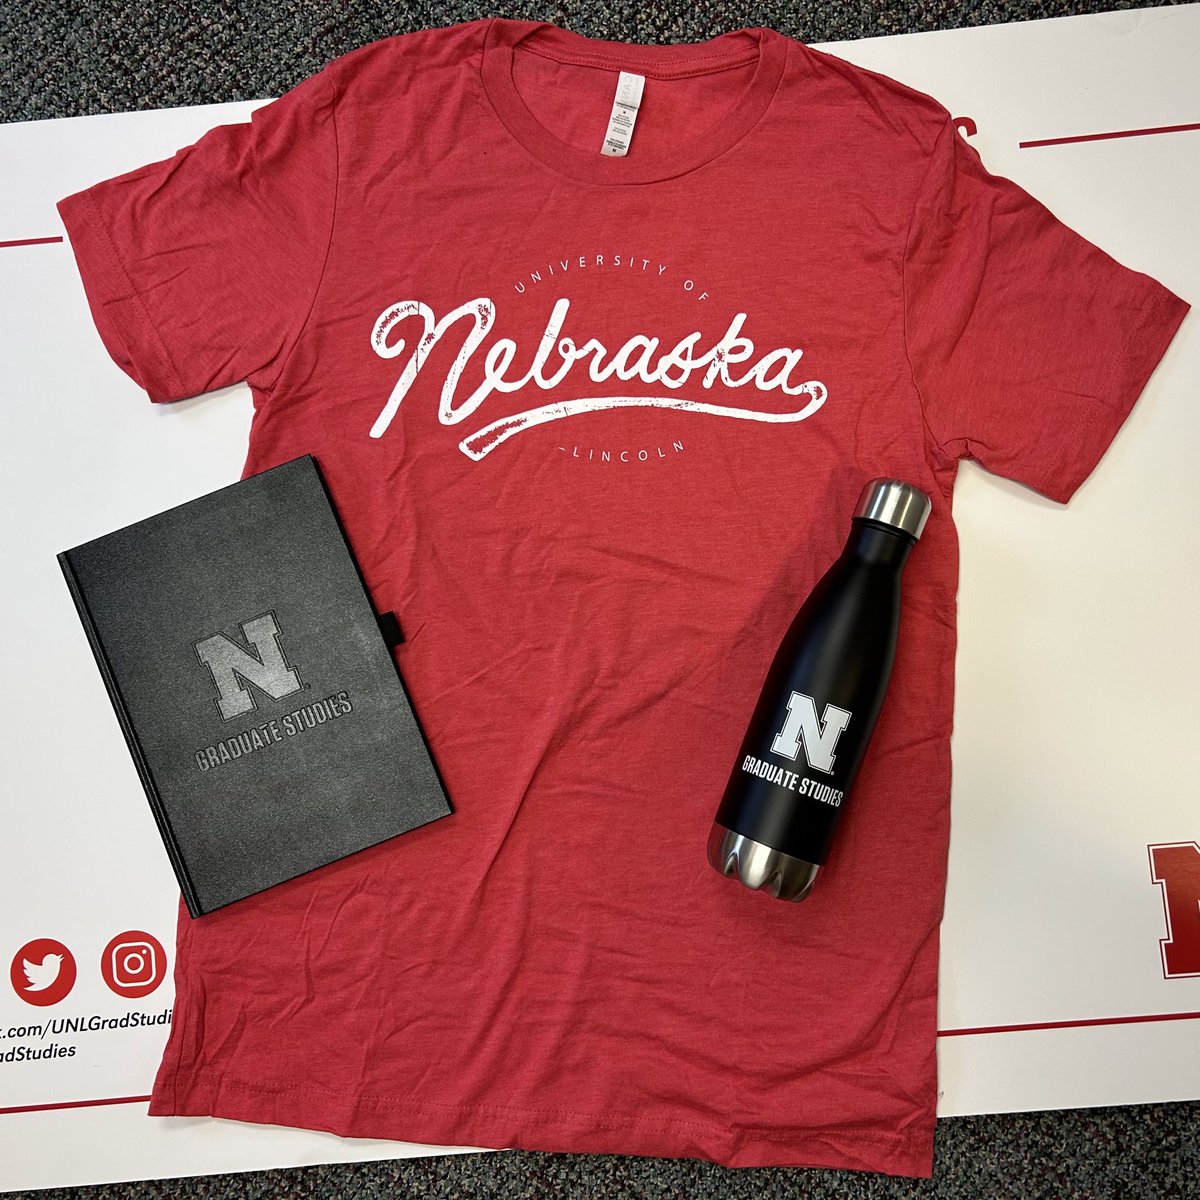 Grab your Nebraska grad gear and a latte at Seaton Hall from 10:30 a.m. to 12 today! We’re on the third floor and eager to welcome our new and returning grad and professional students back to campus.